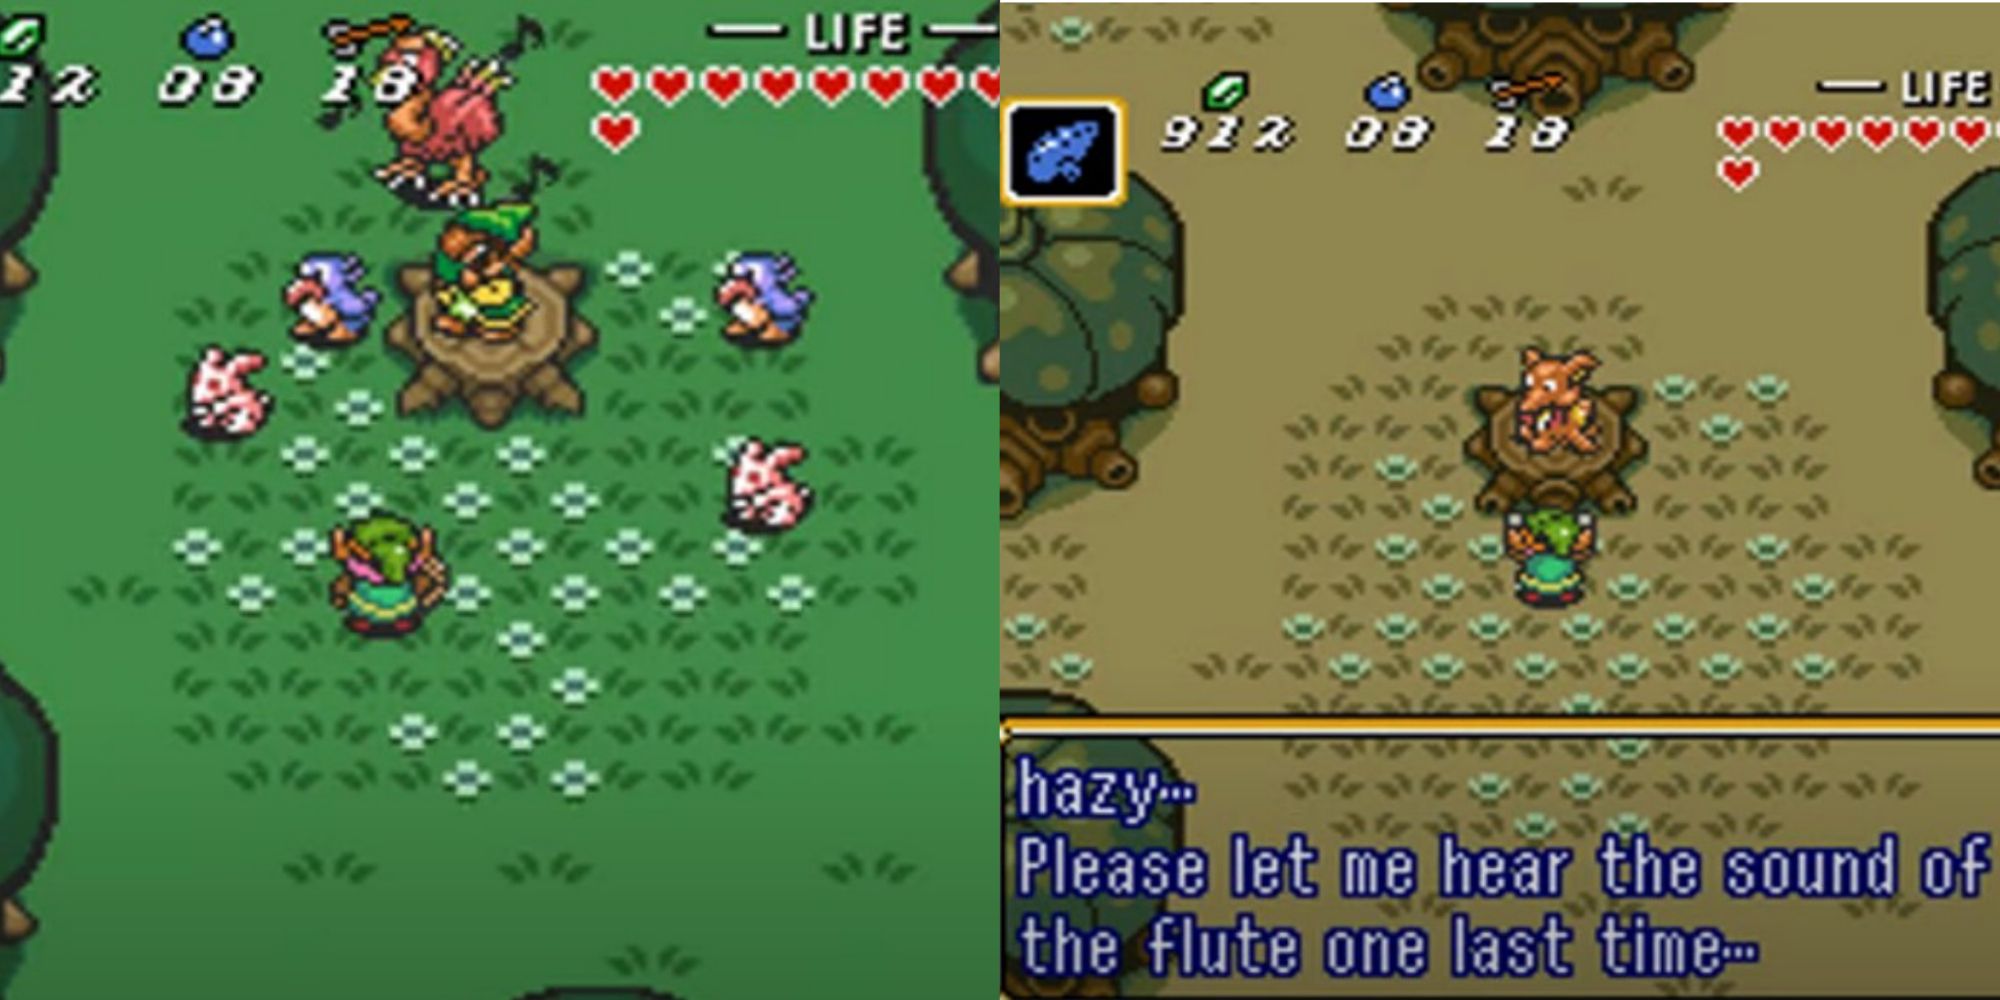 Split image screenshots of the Flute Boy surrounded by woodland animals in the Light World and Link speaking to the Flute Boy in the Dark World, who says, "Please let me hear the sound of the flute one last time."